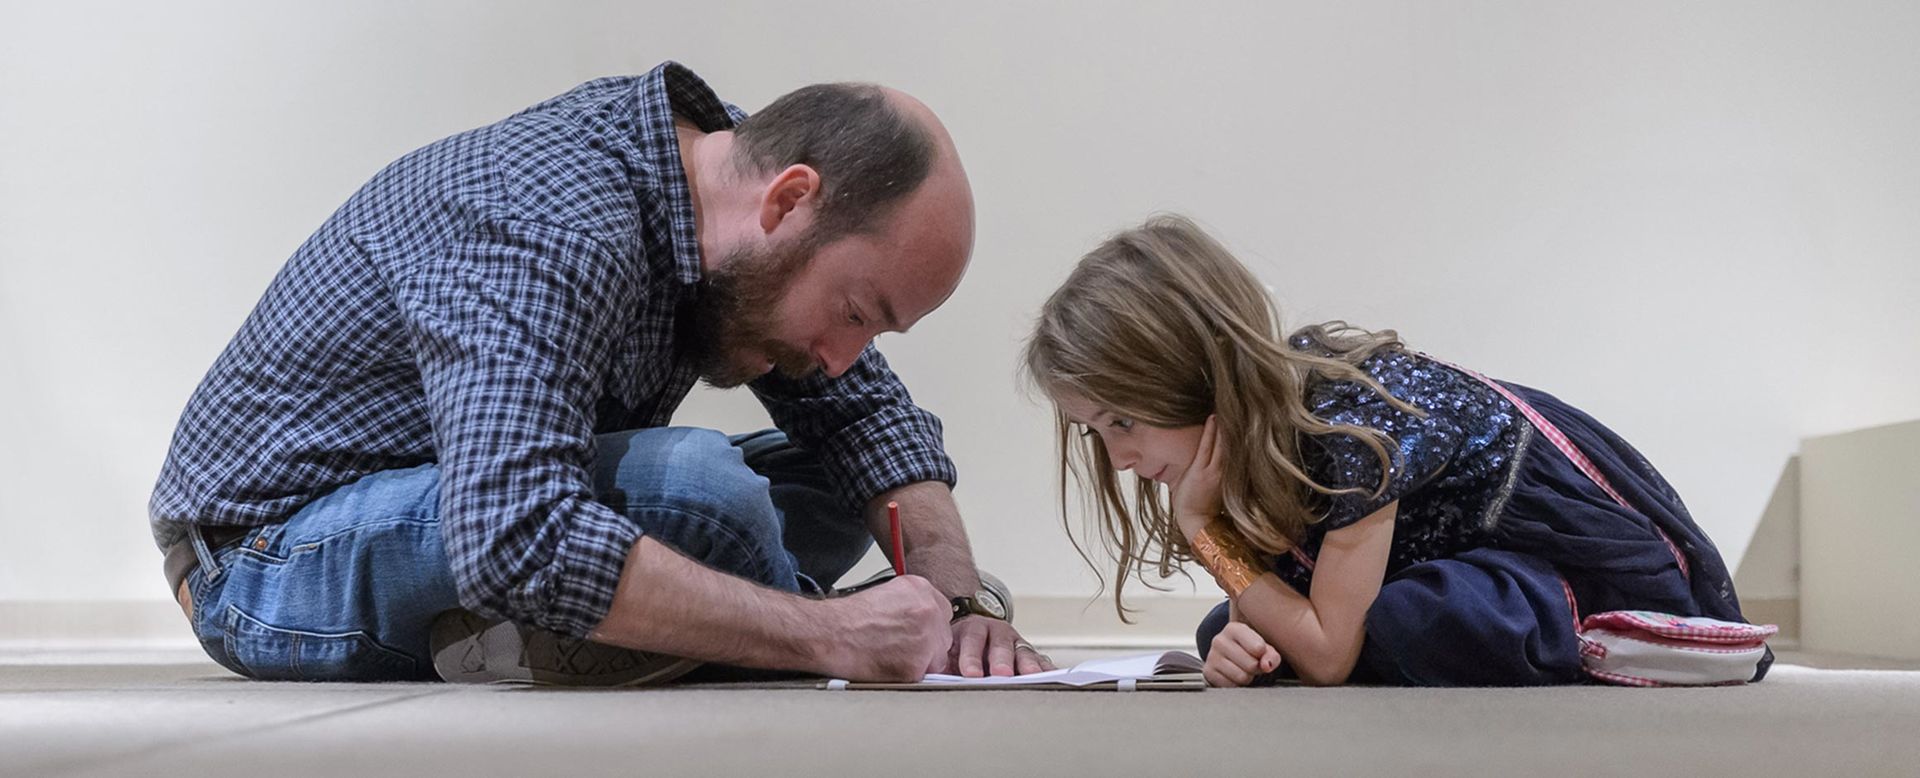 A young girl sits watching a bearded man sketch in the middle of the gallery floor